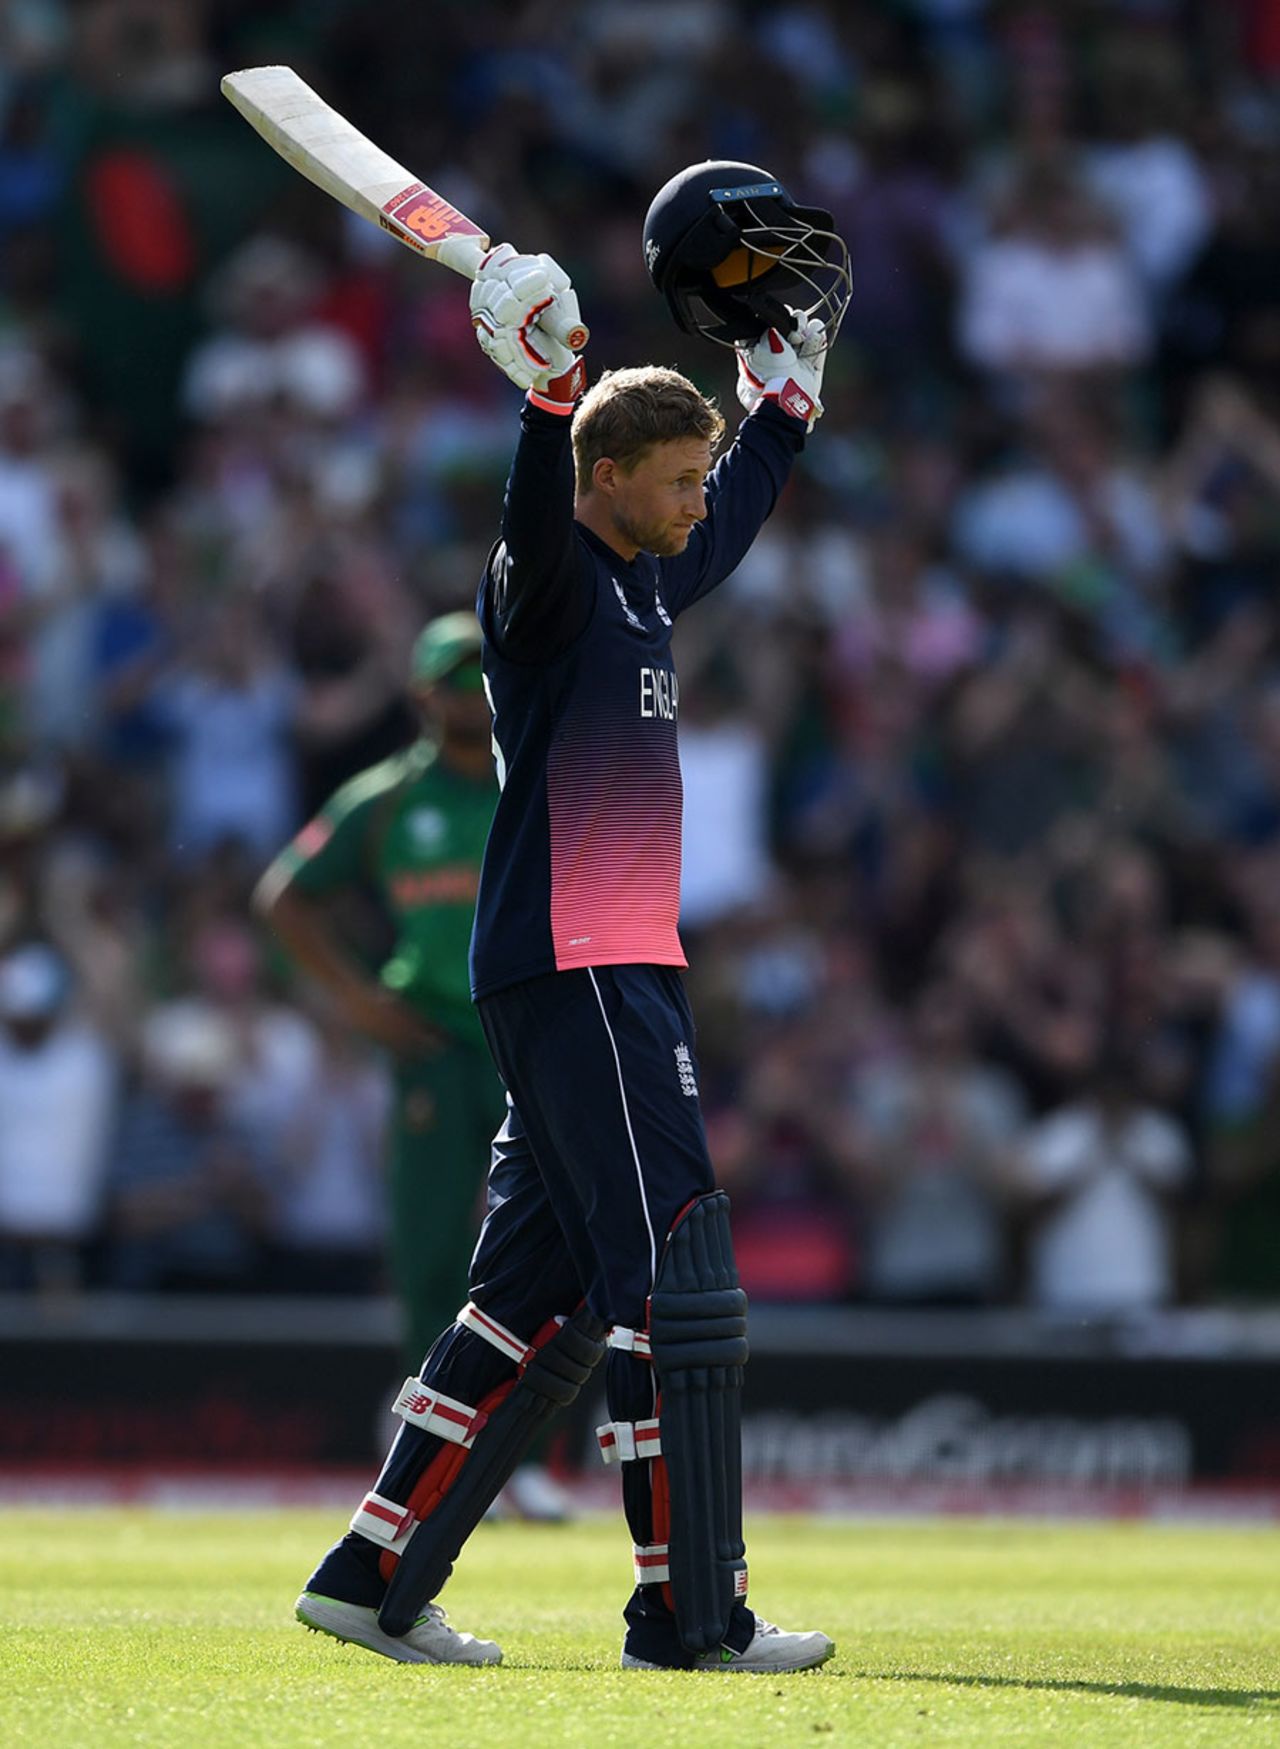 Joe Root brought up his 10th ODI hundred, England v Bangladesh, Champions Trophy, Group A, The Oval, June 1, 2017